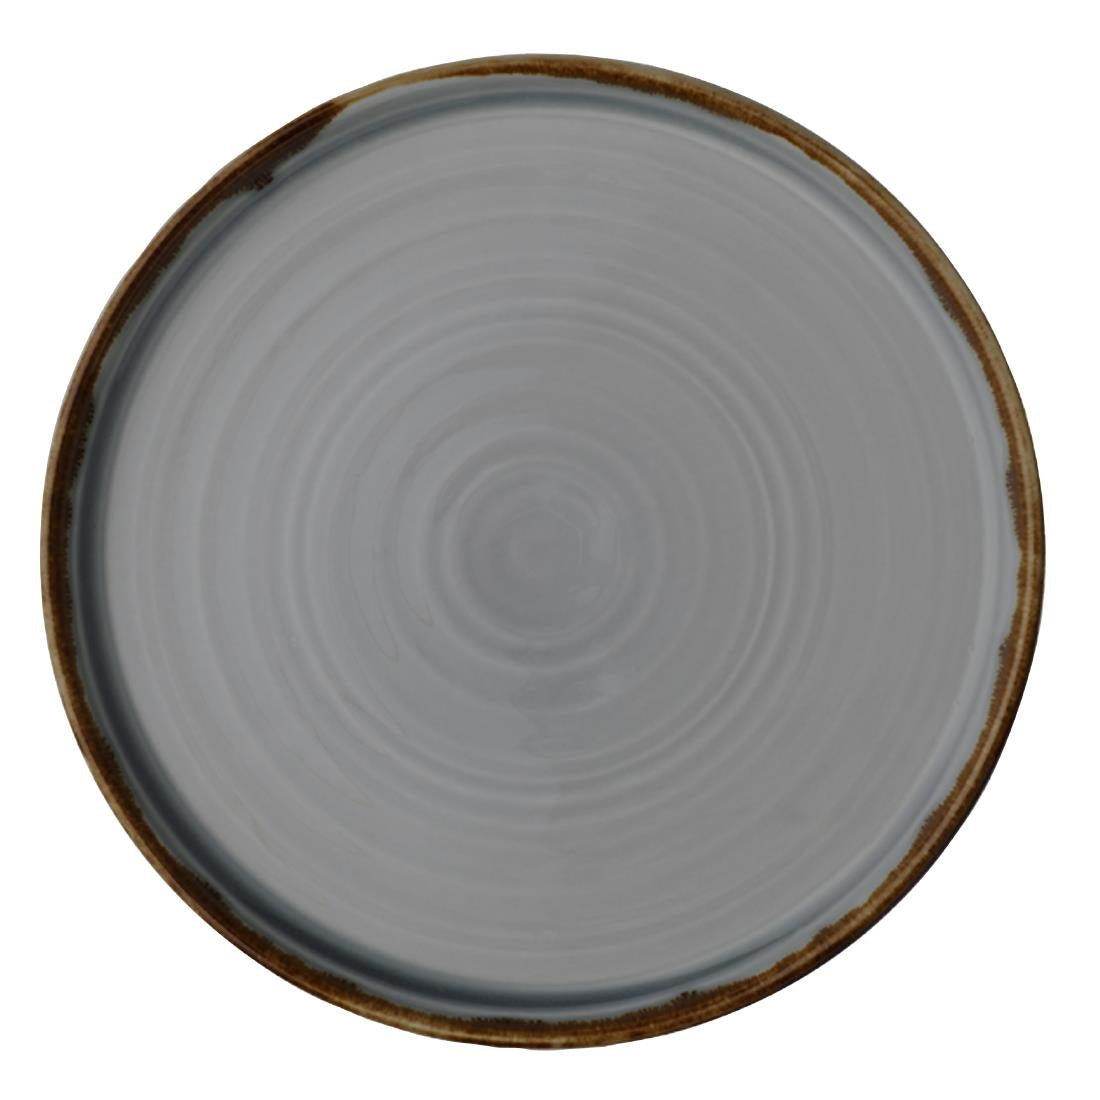 FX150 Dudson Harvest Walled Plates Grey 210mm (Pack of 6) JD Catering Equipment Solutions Ltd